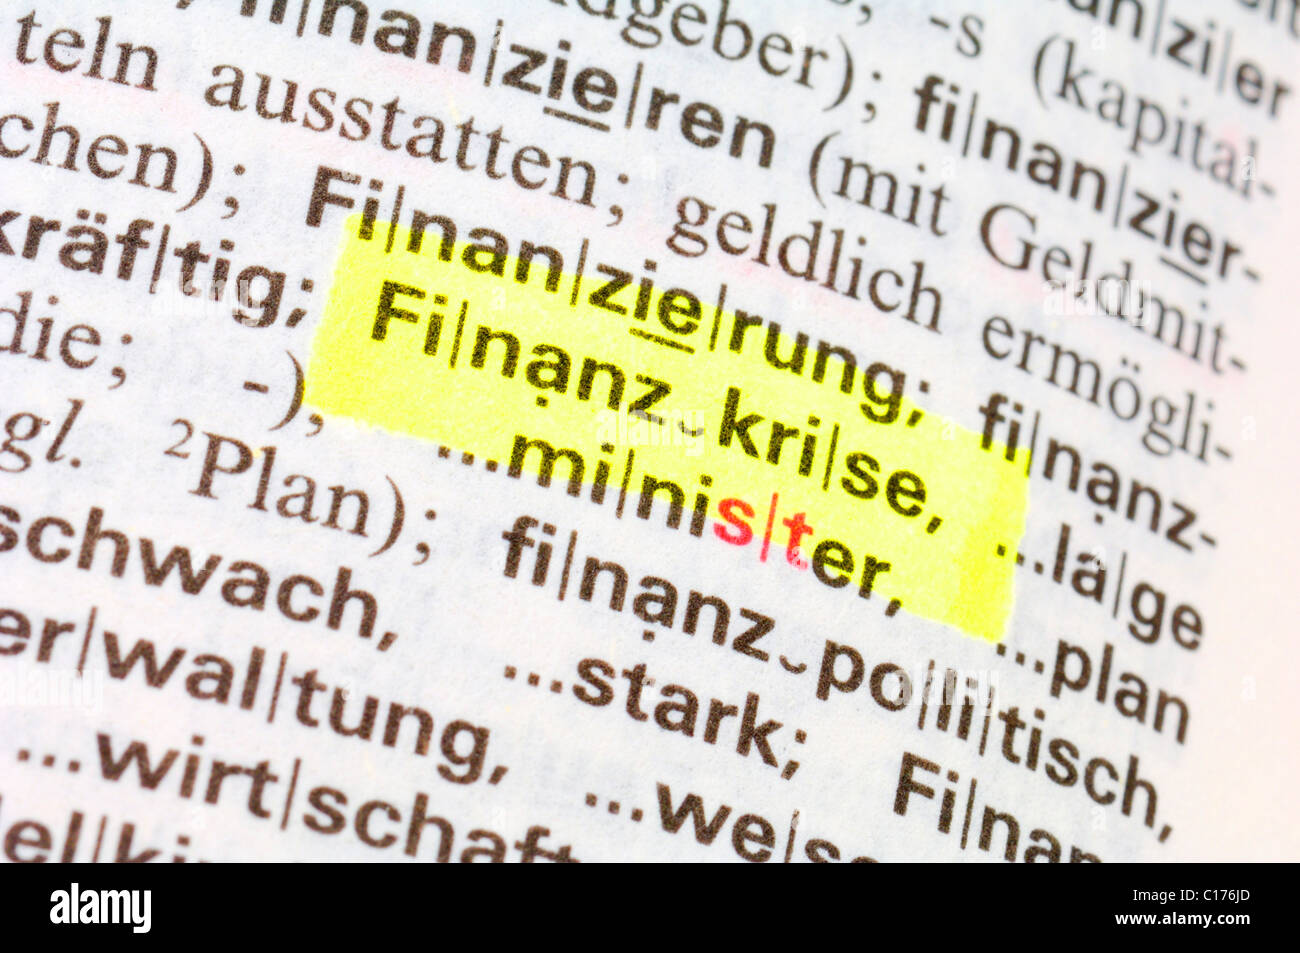 Dictionary entry, Finanzkrise, financial crisis Stock Photo